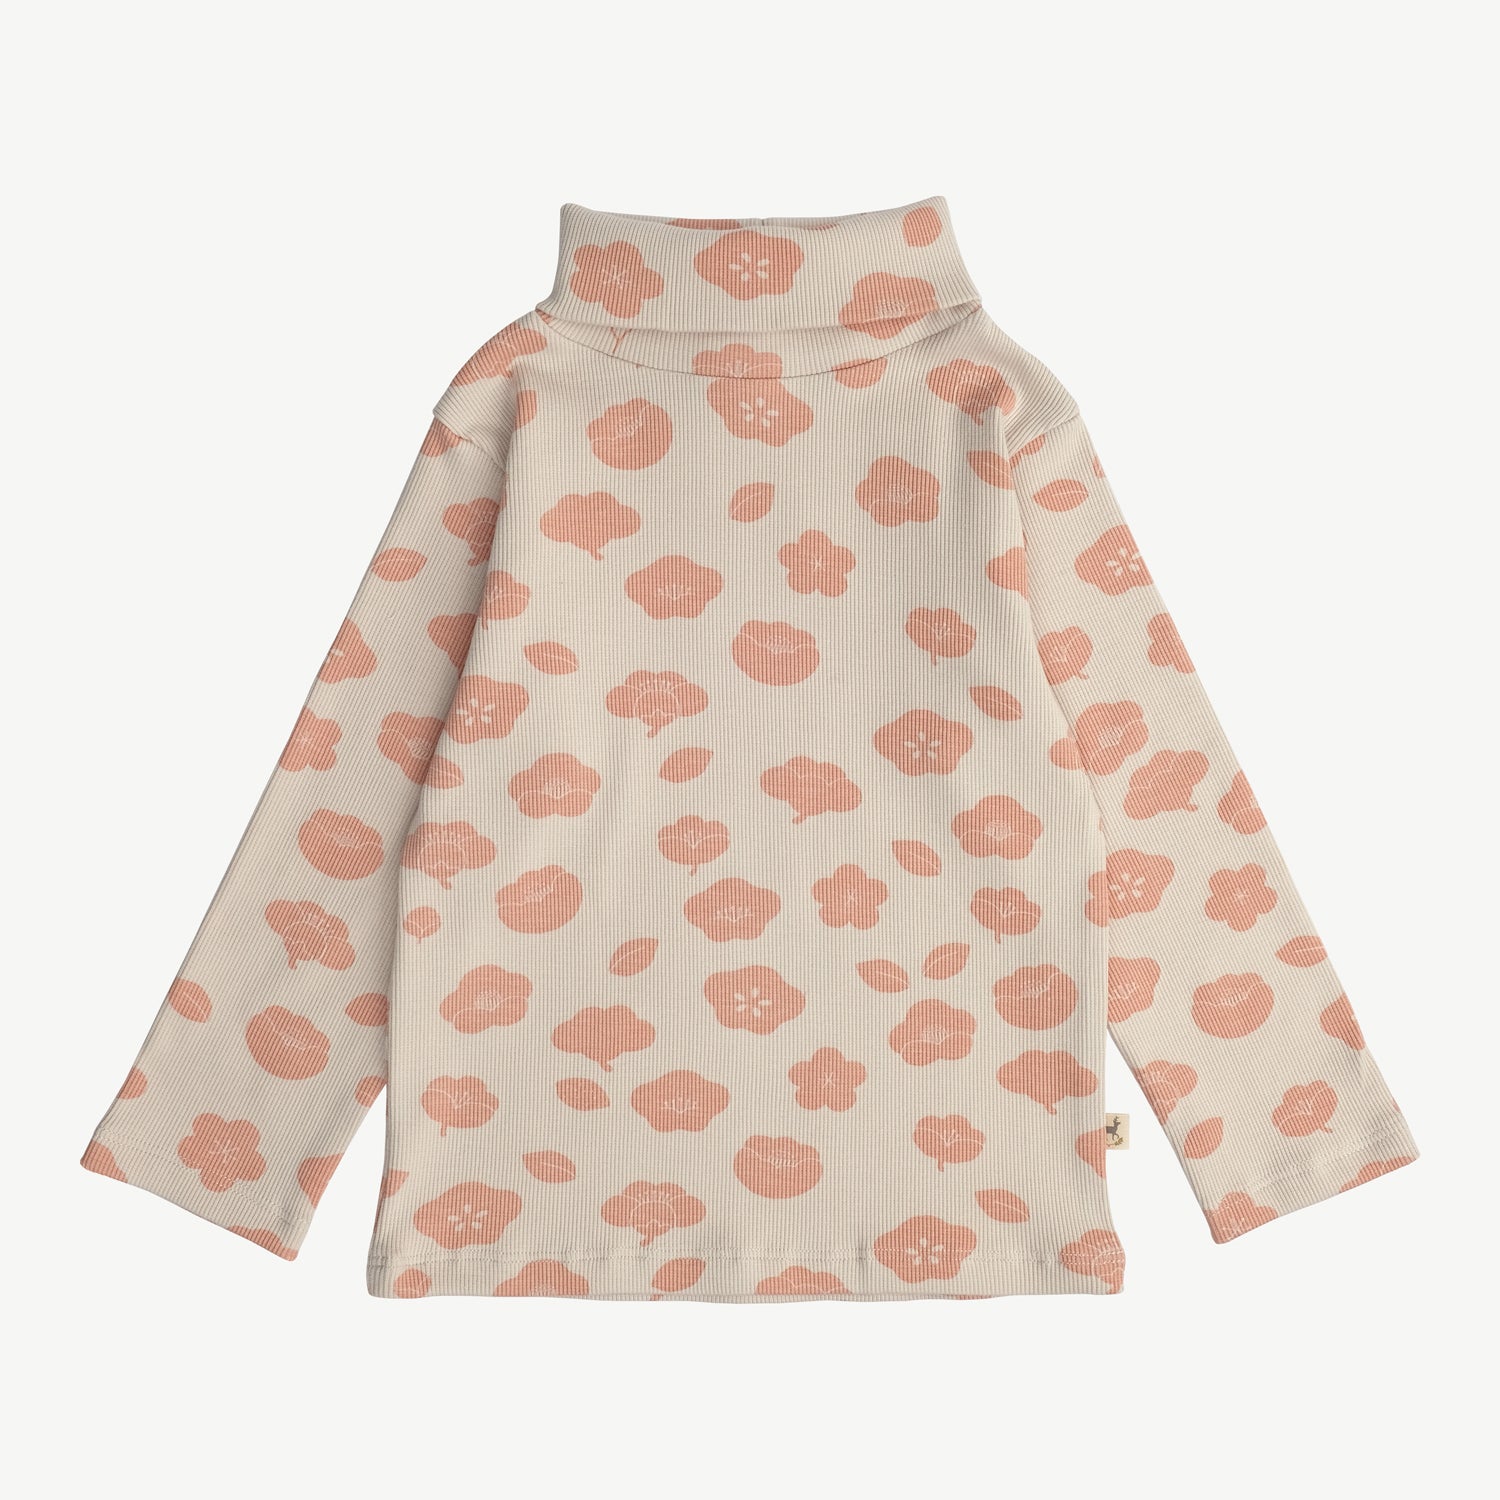 'plums in bloom' white sand turtleneck top